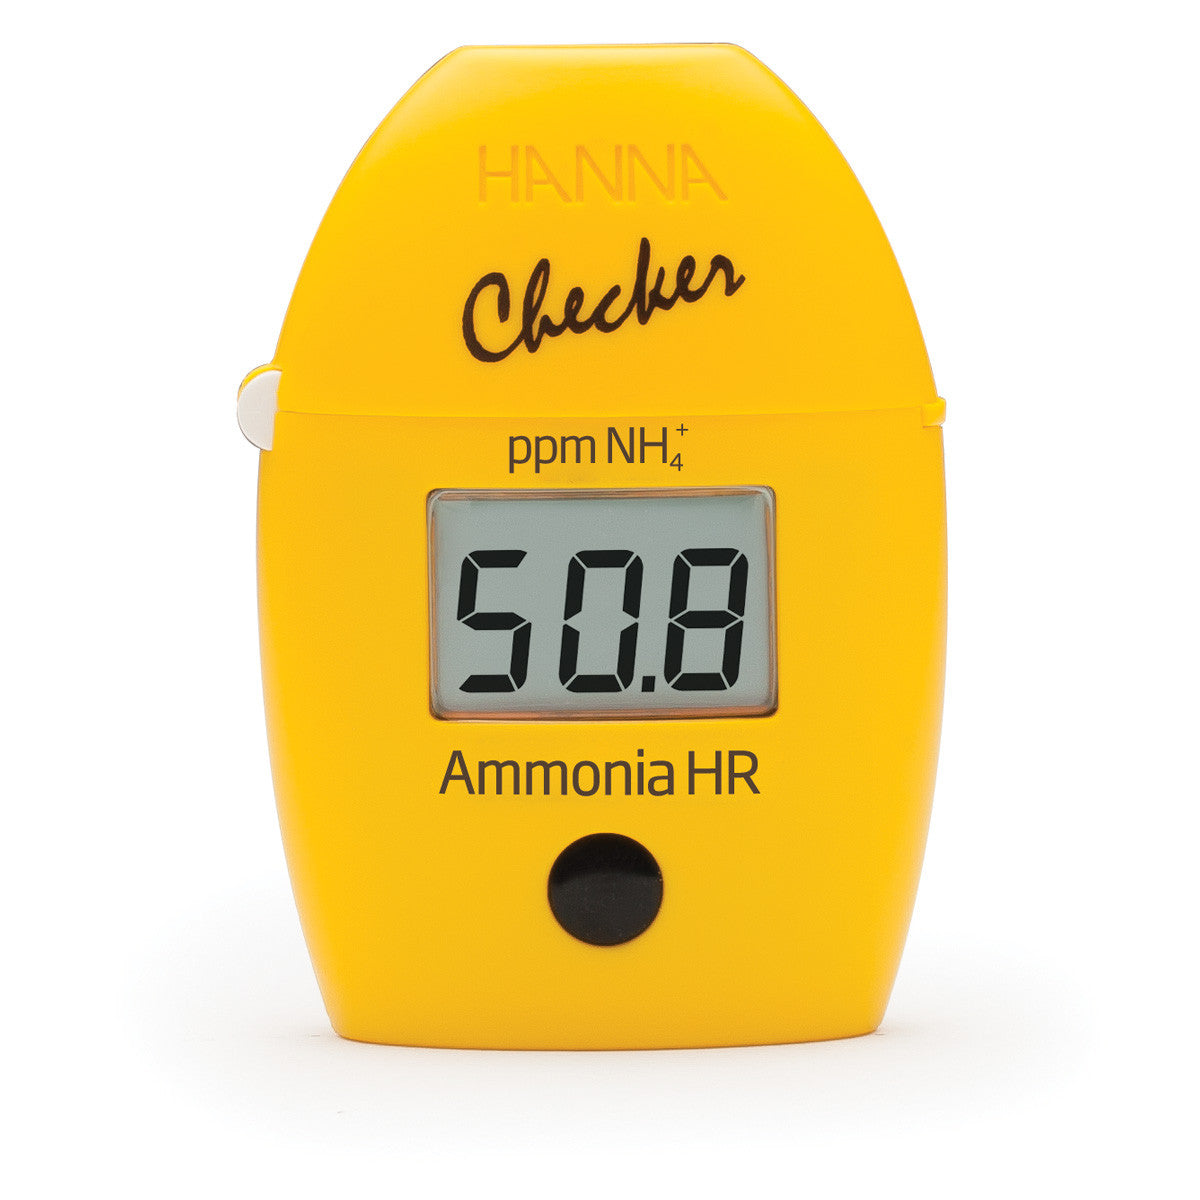 The TAS Ammonia High Range Checker HC is an important tool for assessing water quality, specifically in freshwater environments. The device accurately measures levels of ammonia, which is a key SEO keyword for maintaining optimal water conditions.